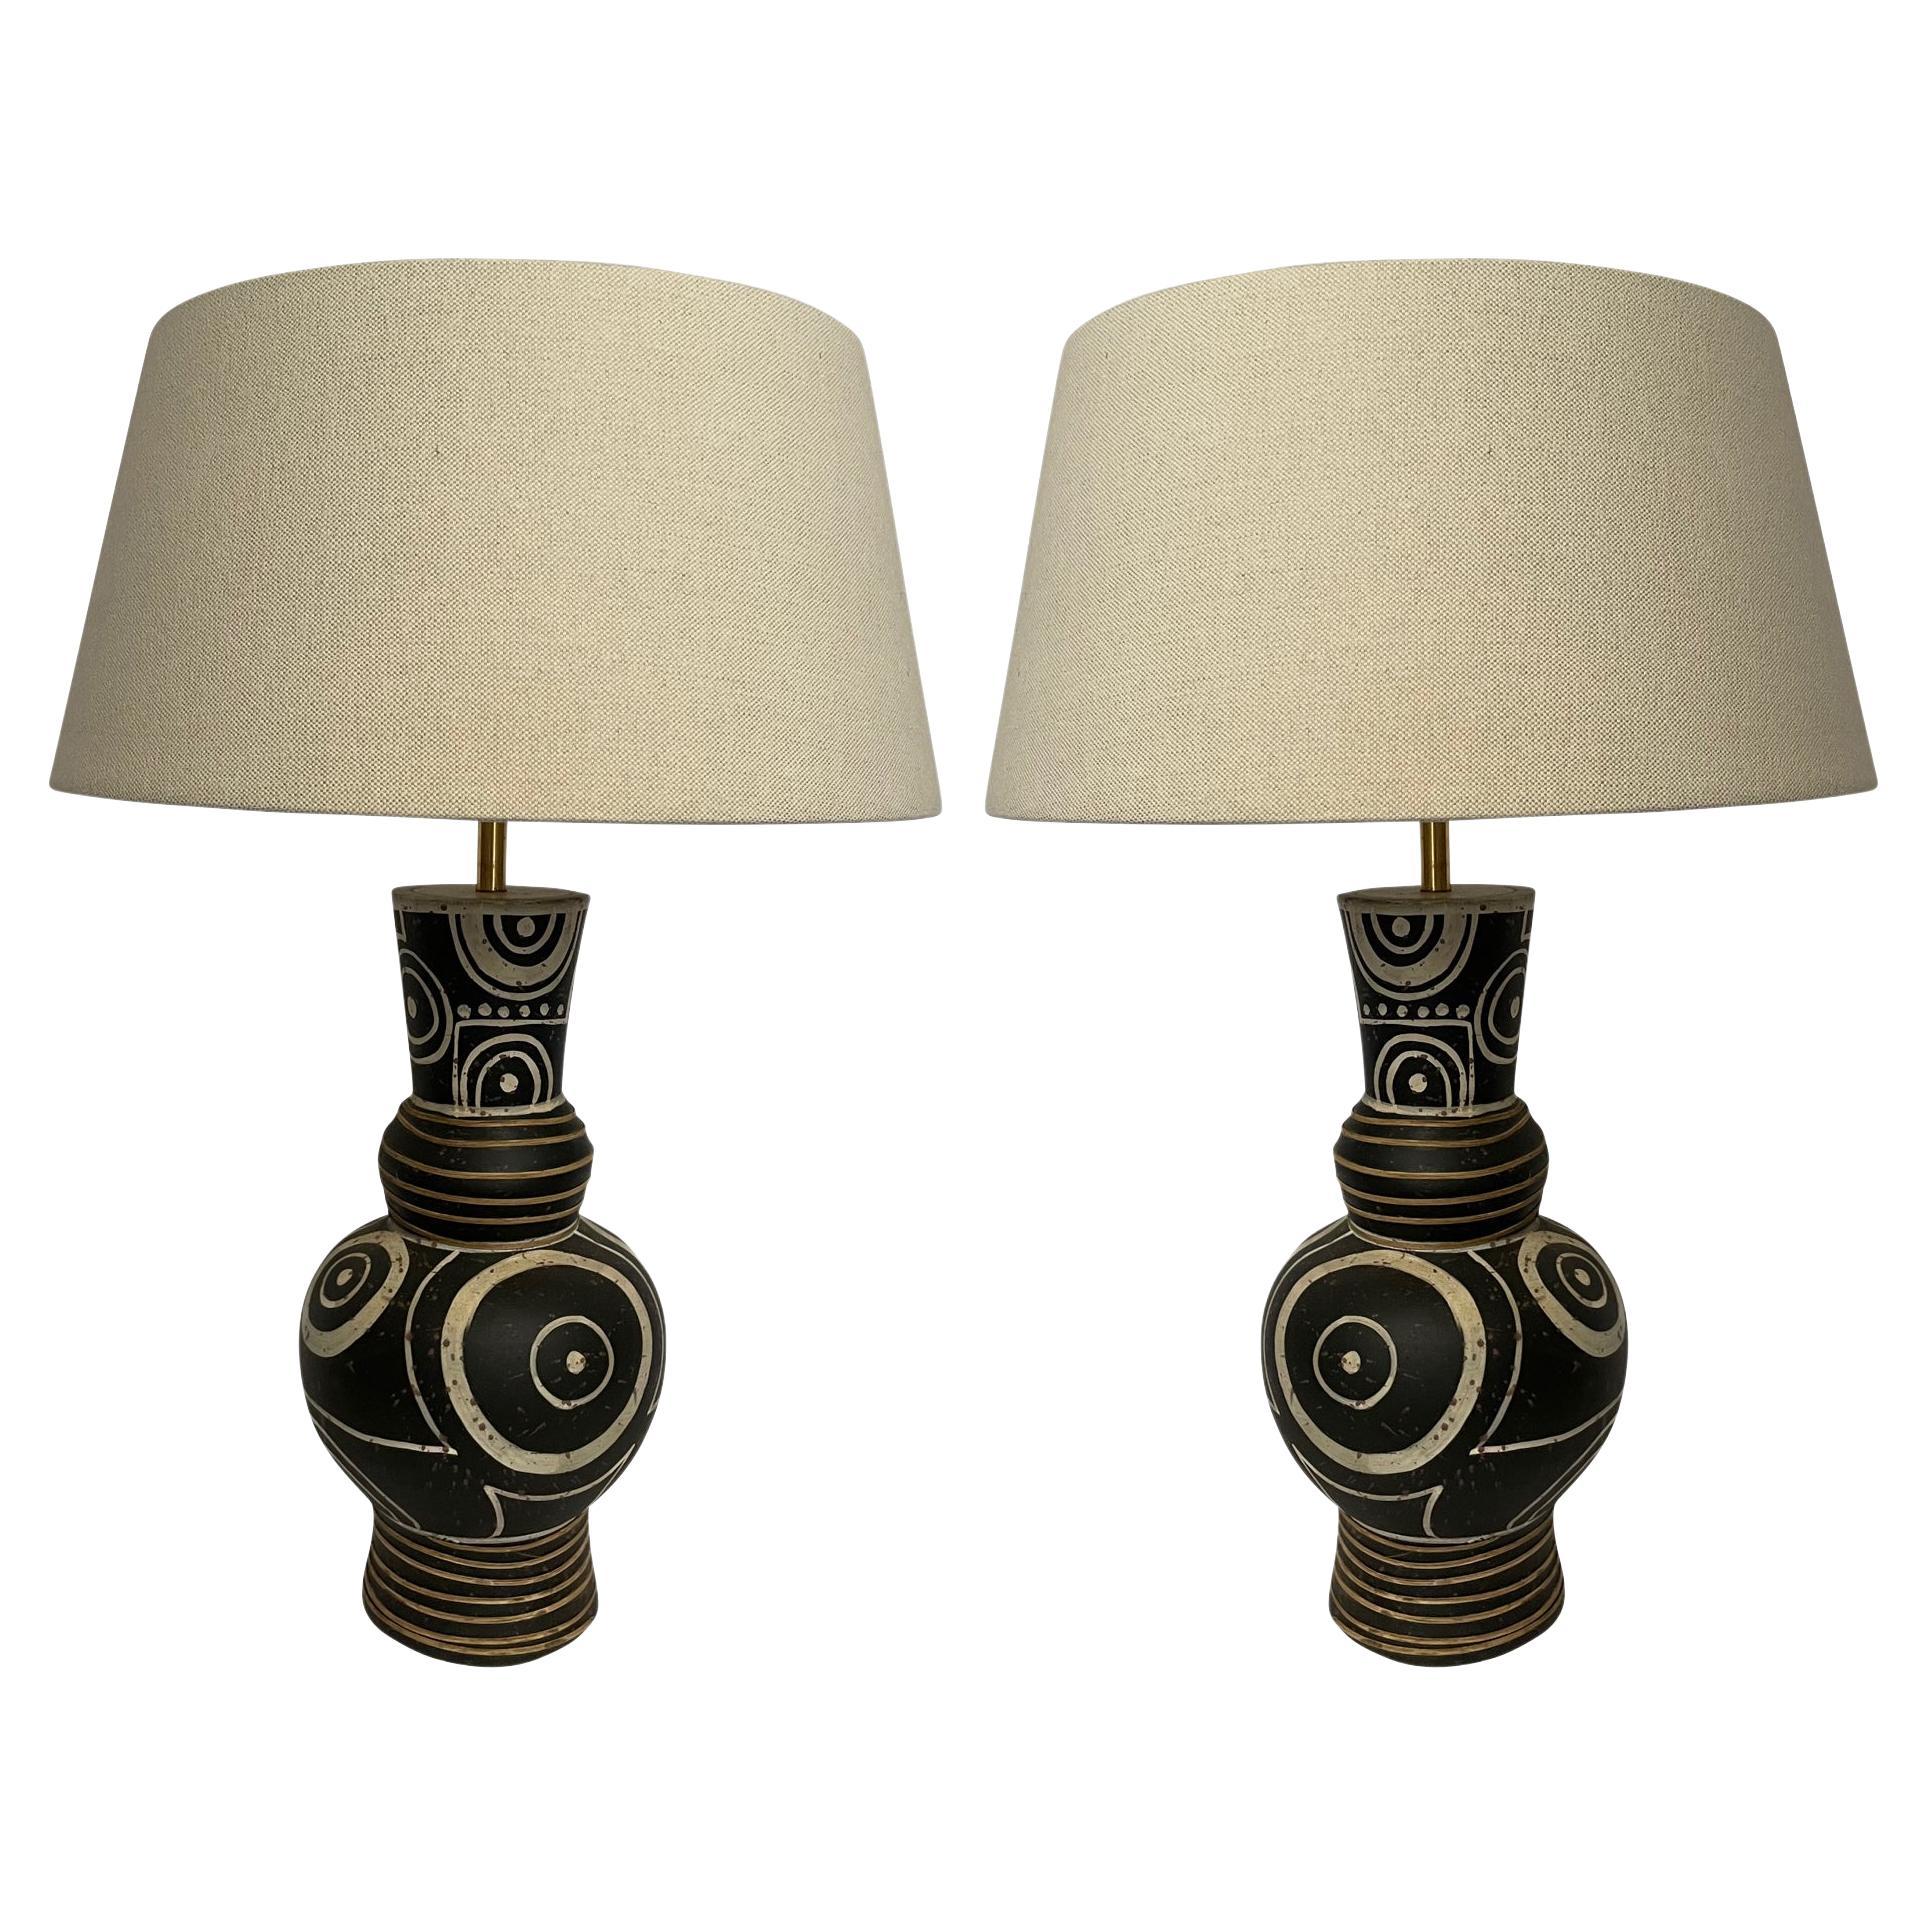 Black & Brown Tribal Design Pair of Lamps, China, Contemporary